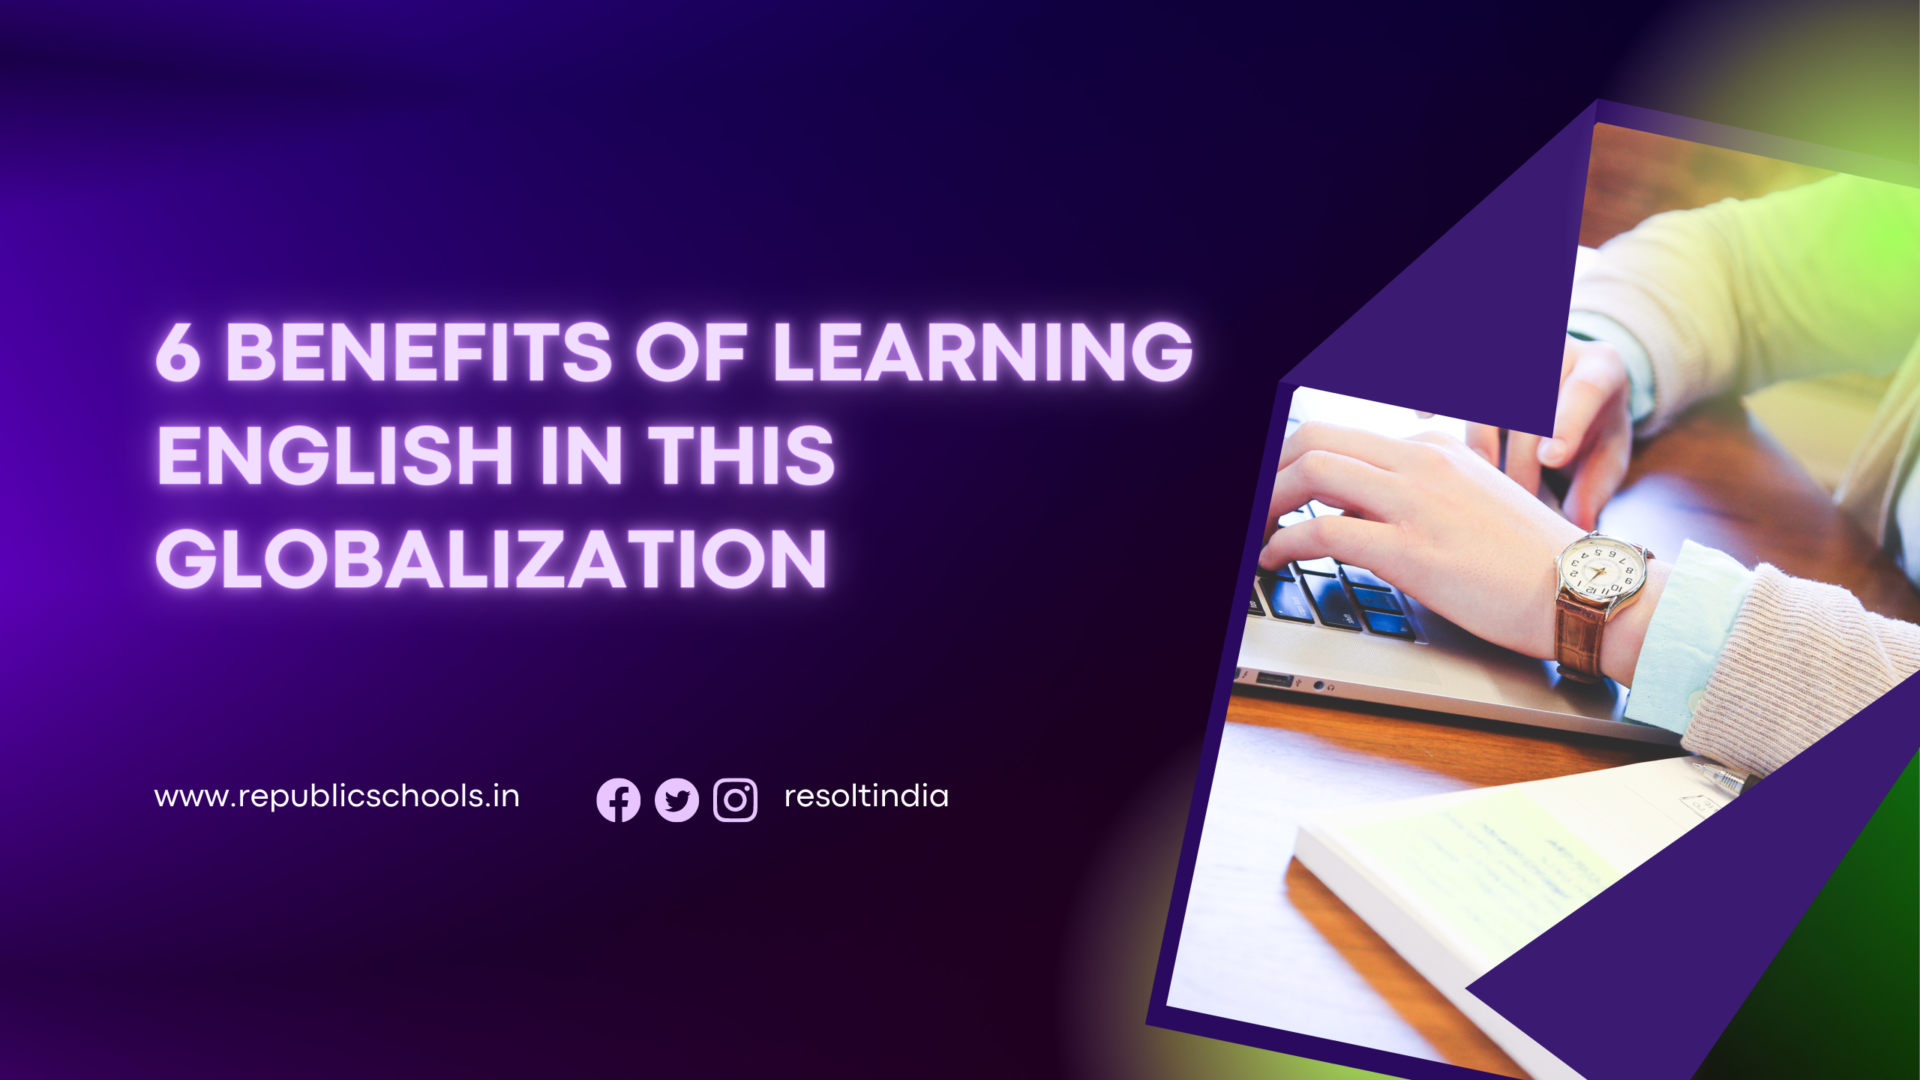 6 Benefits of Learning English in This Globalization